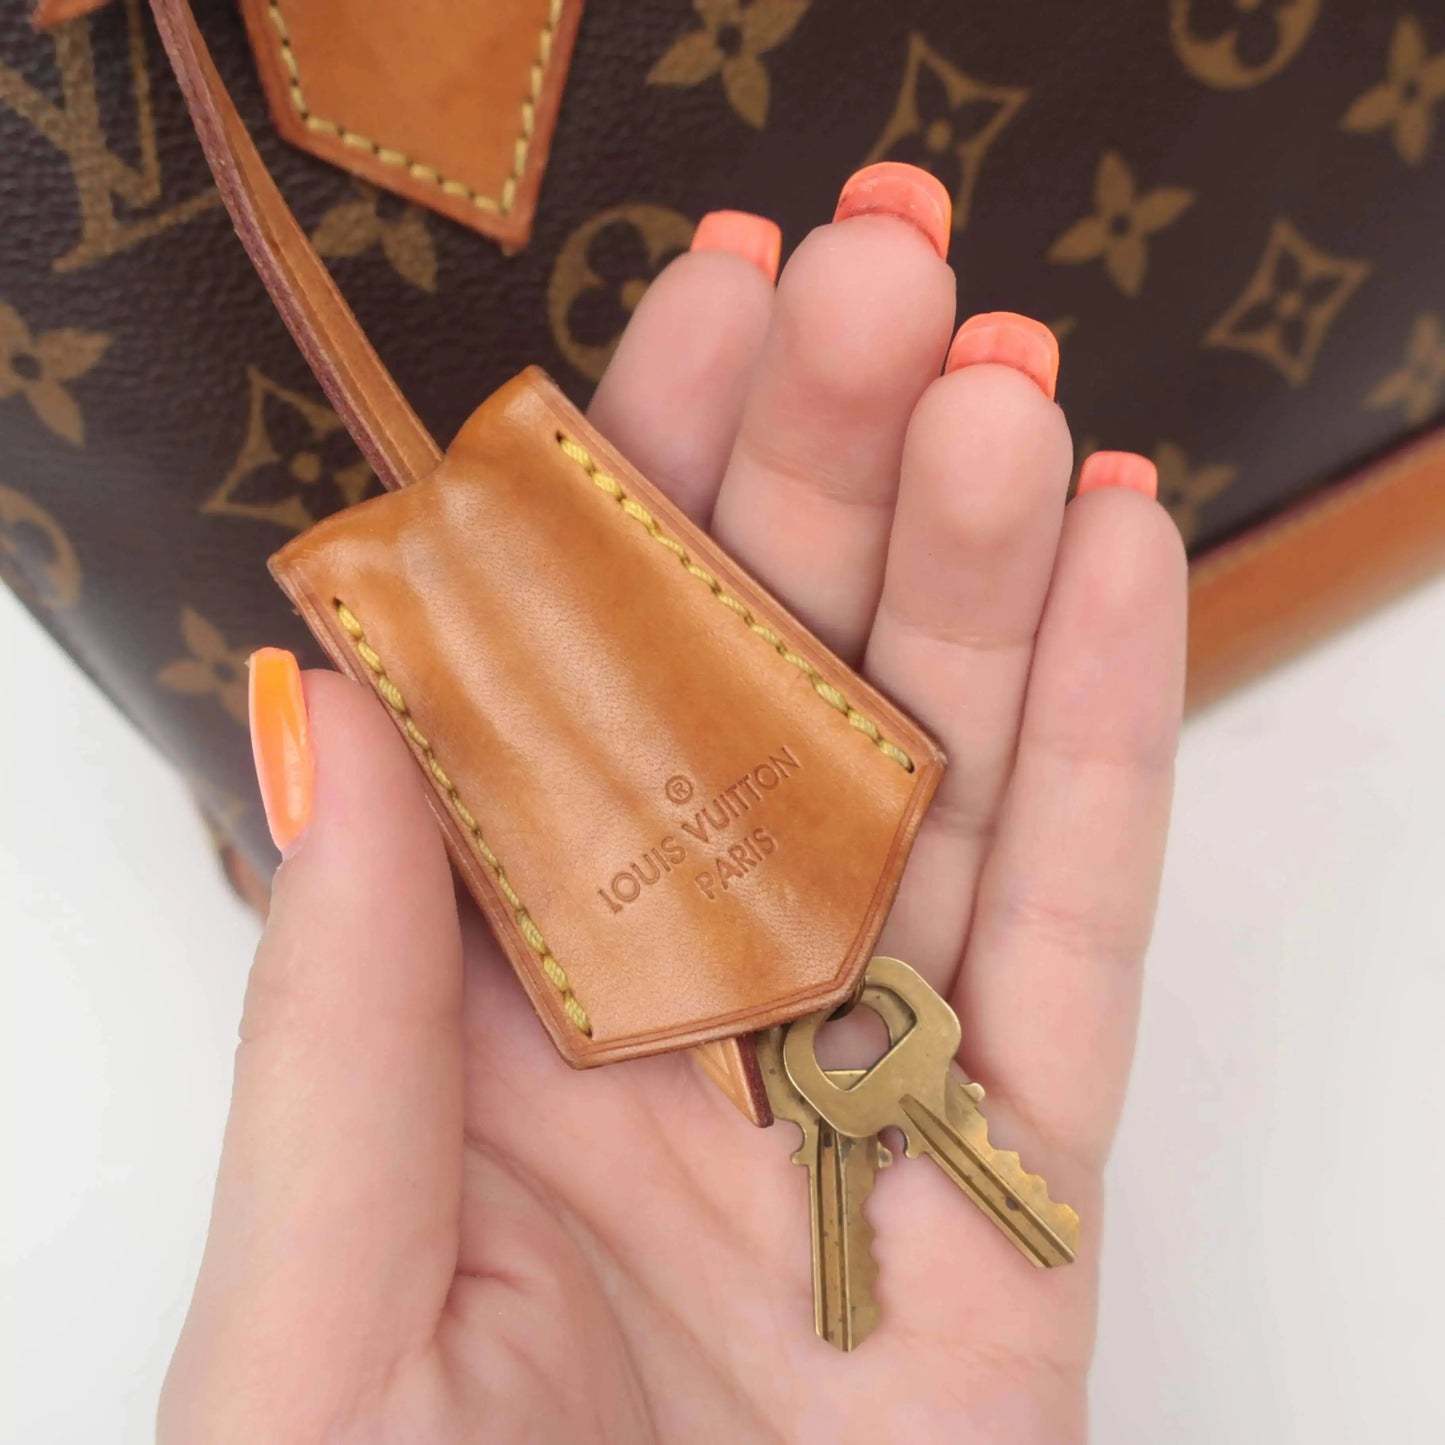 Louis Vuitton Alma BB and the Key Bell/Clochette l ISSUES UPDATES l 